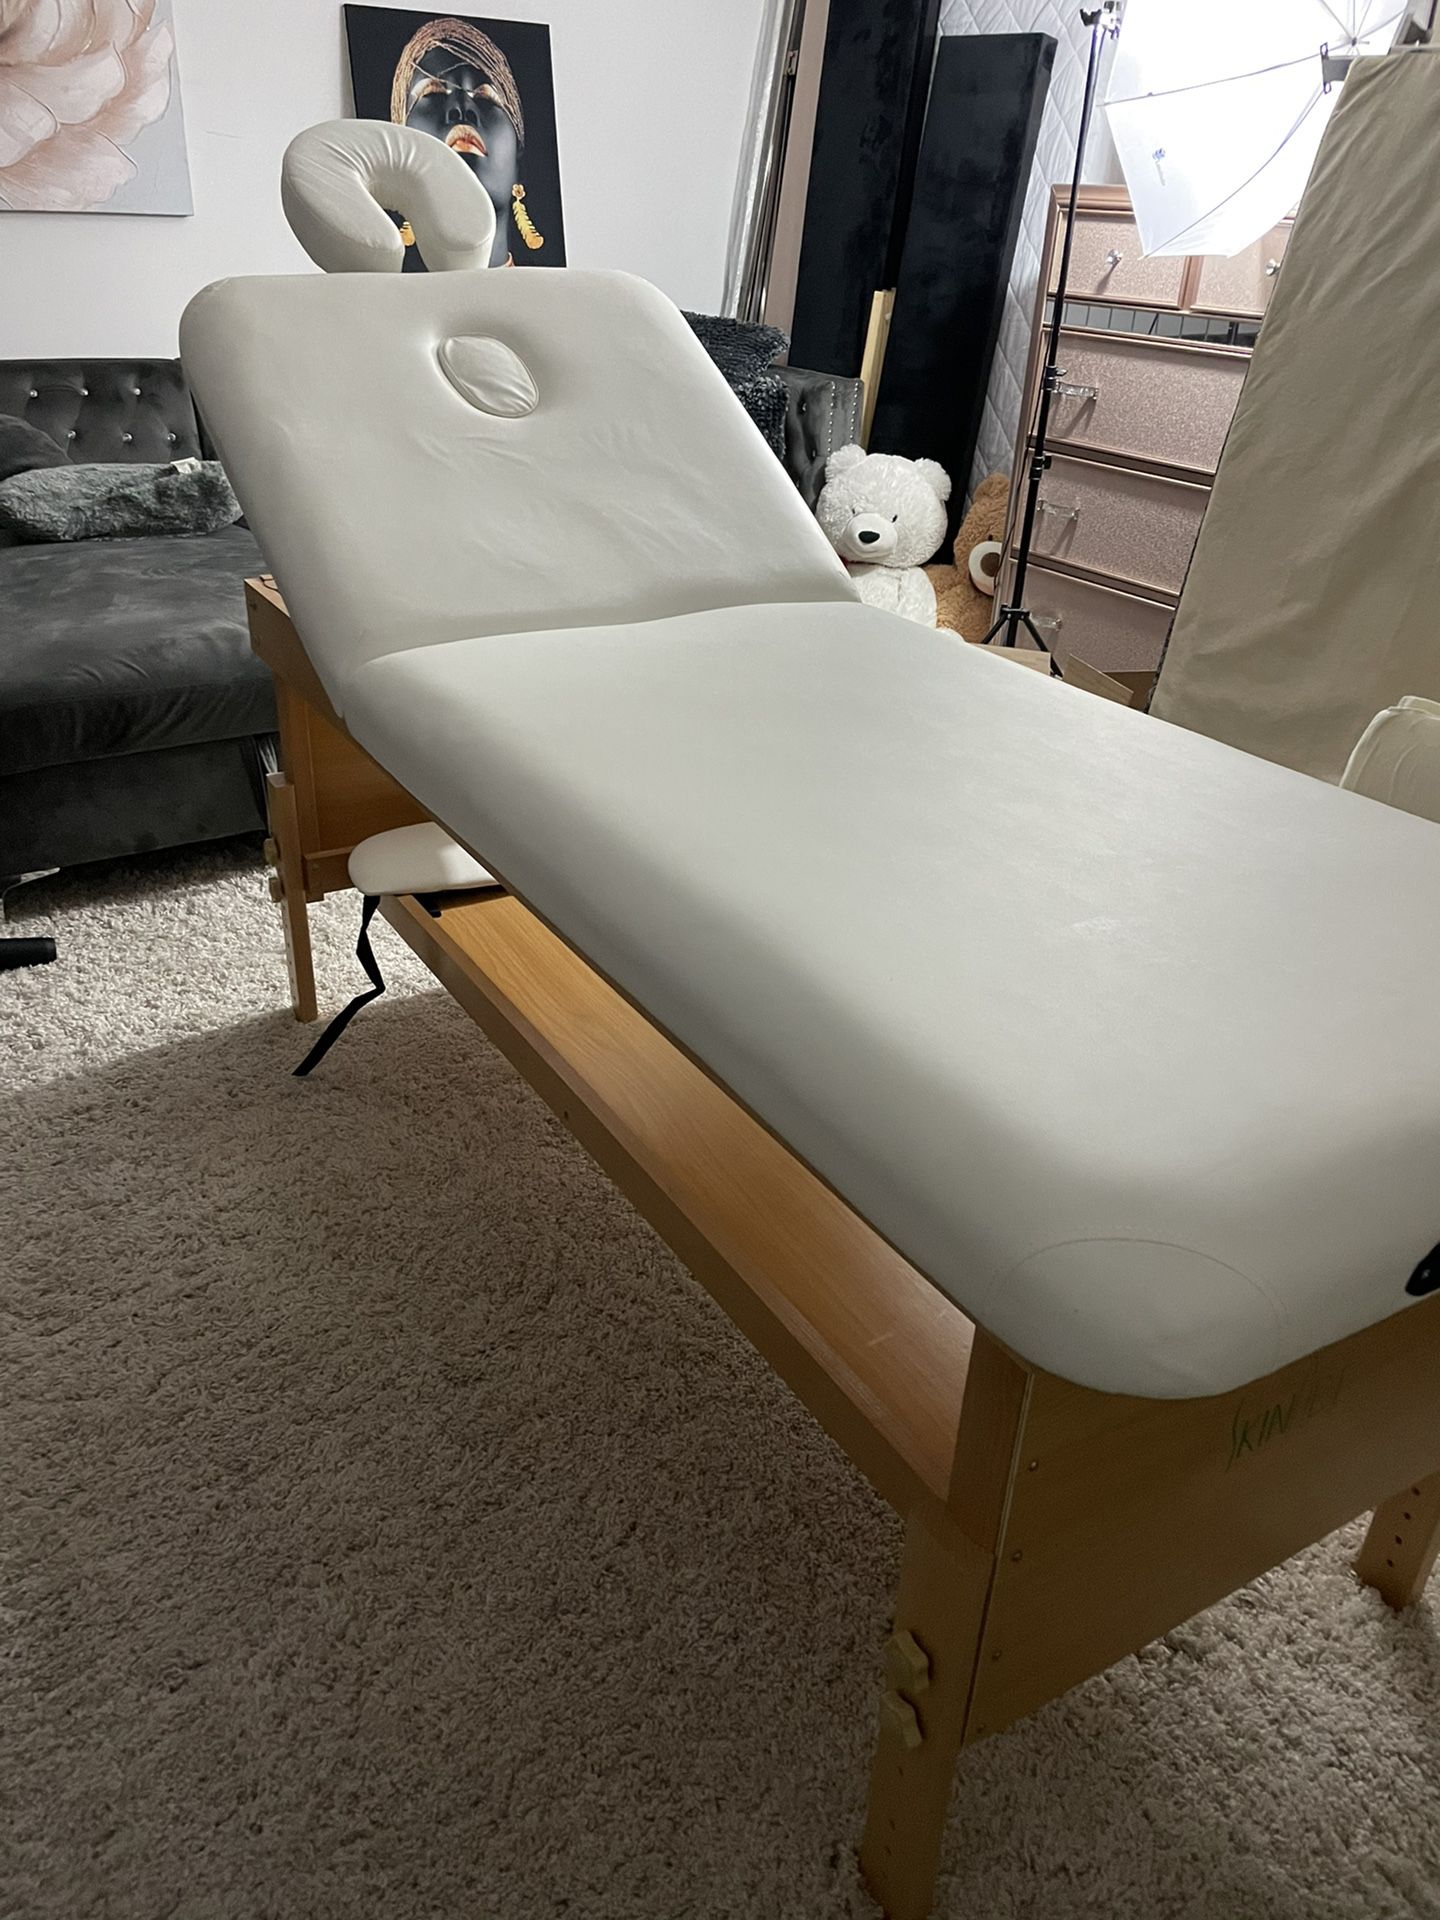 SKINACT Elegance Massage Table Facial Bed & Table